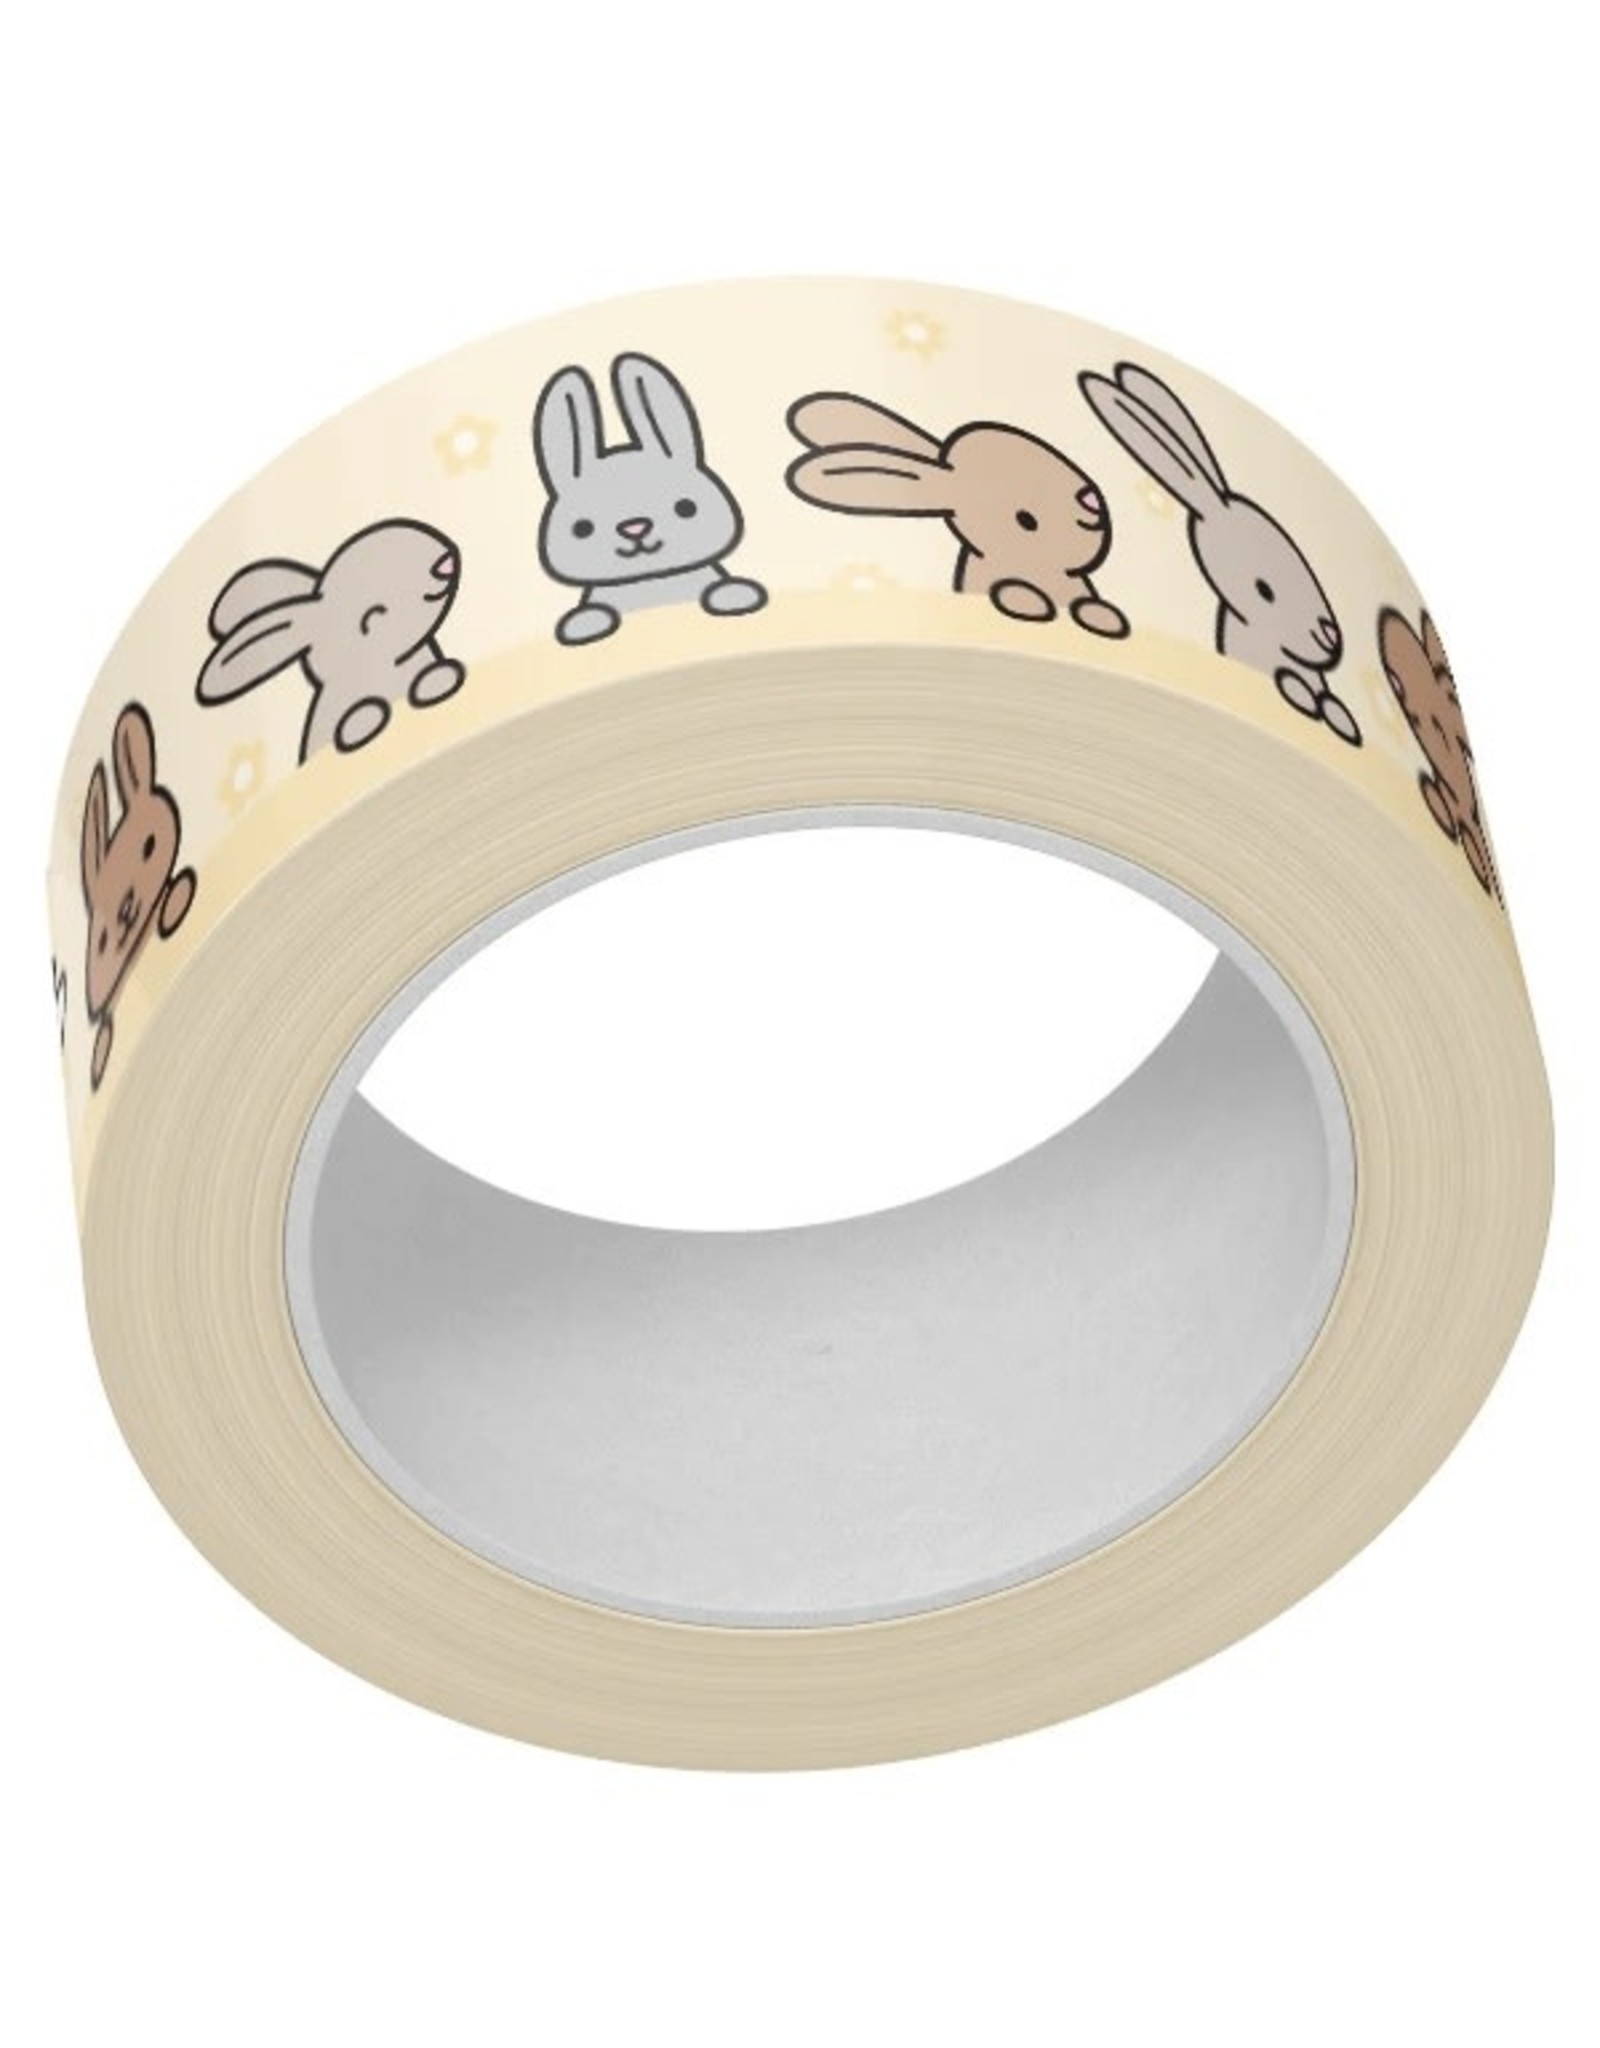 LAWN FAWN LAWN FAWN HOP TO IT WASHI TAPE